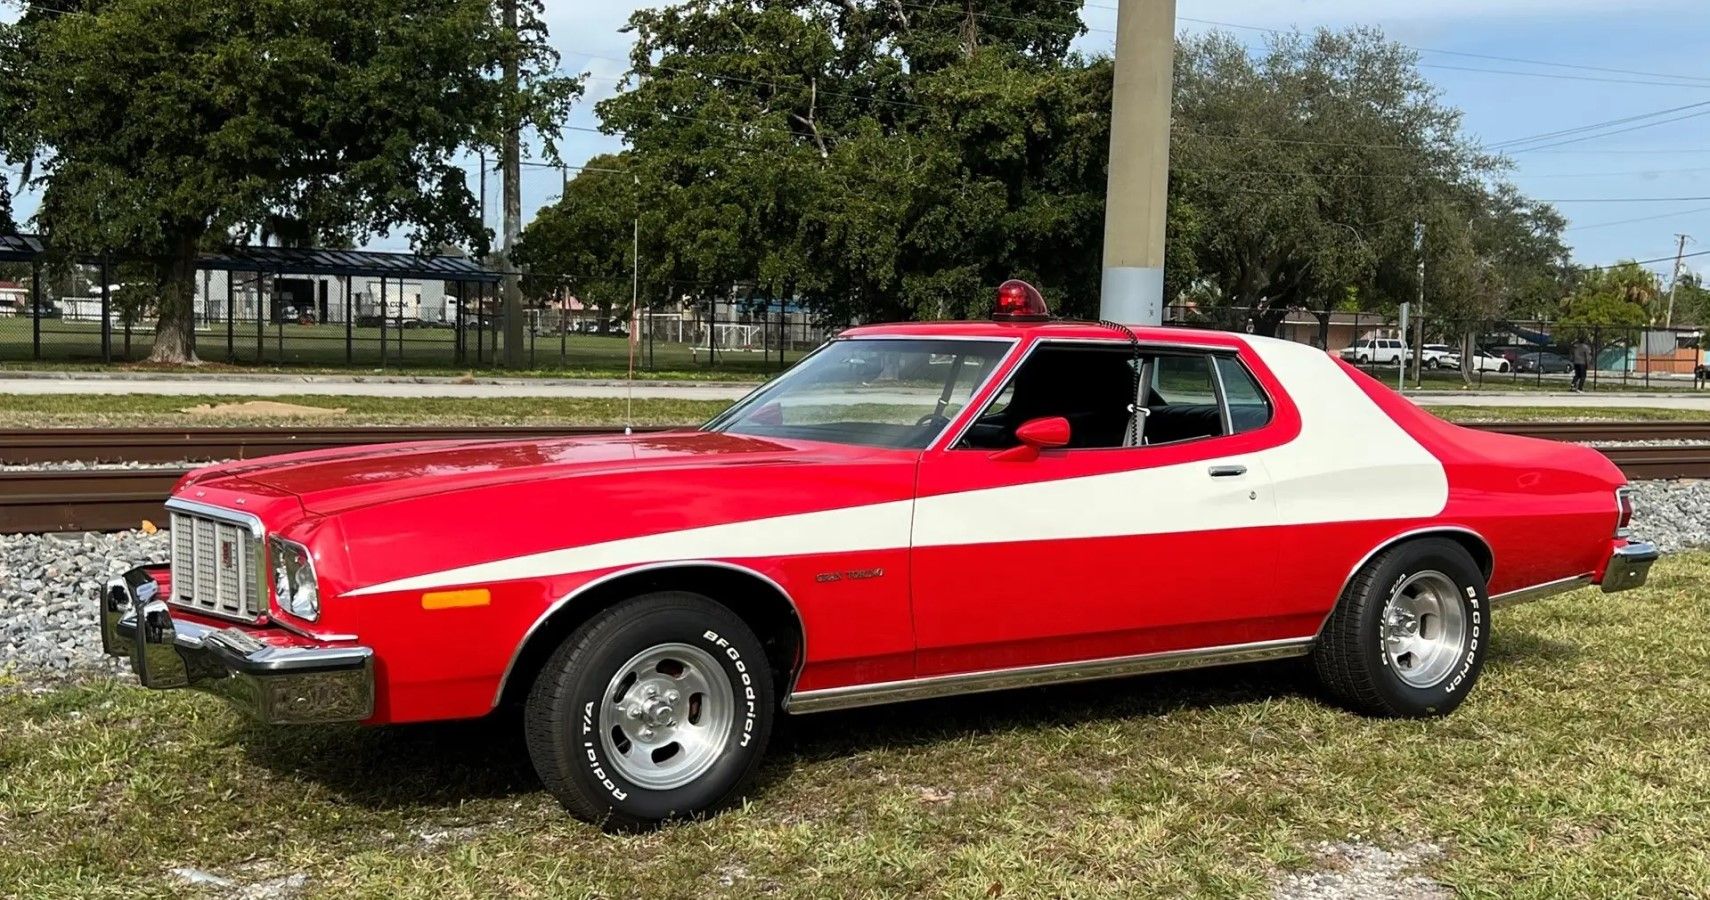 Car Doctor Q&A: Wait, a STARSKY AND HUTCH FORD TORINO!? - BestRide